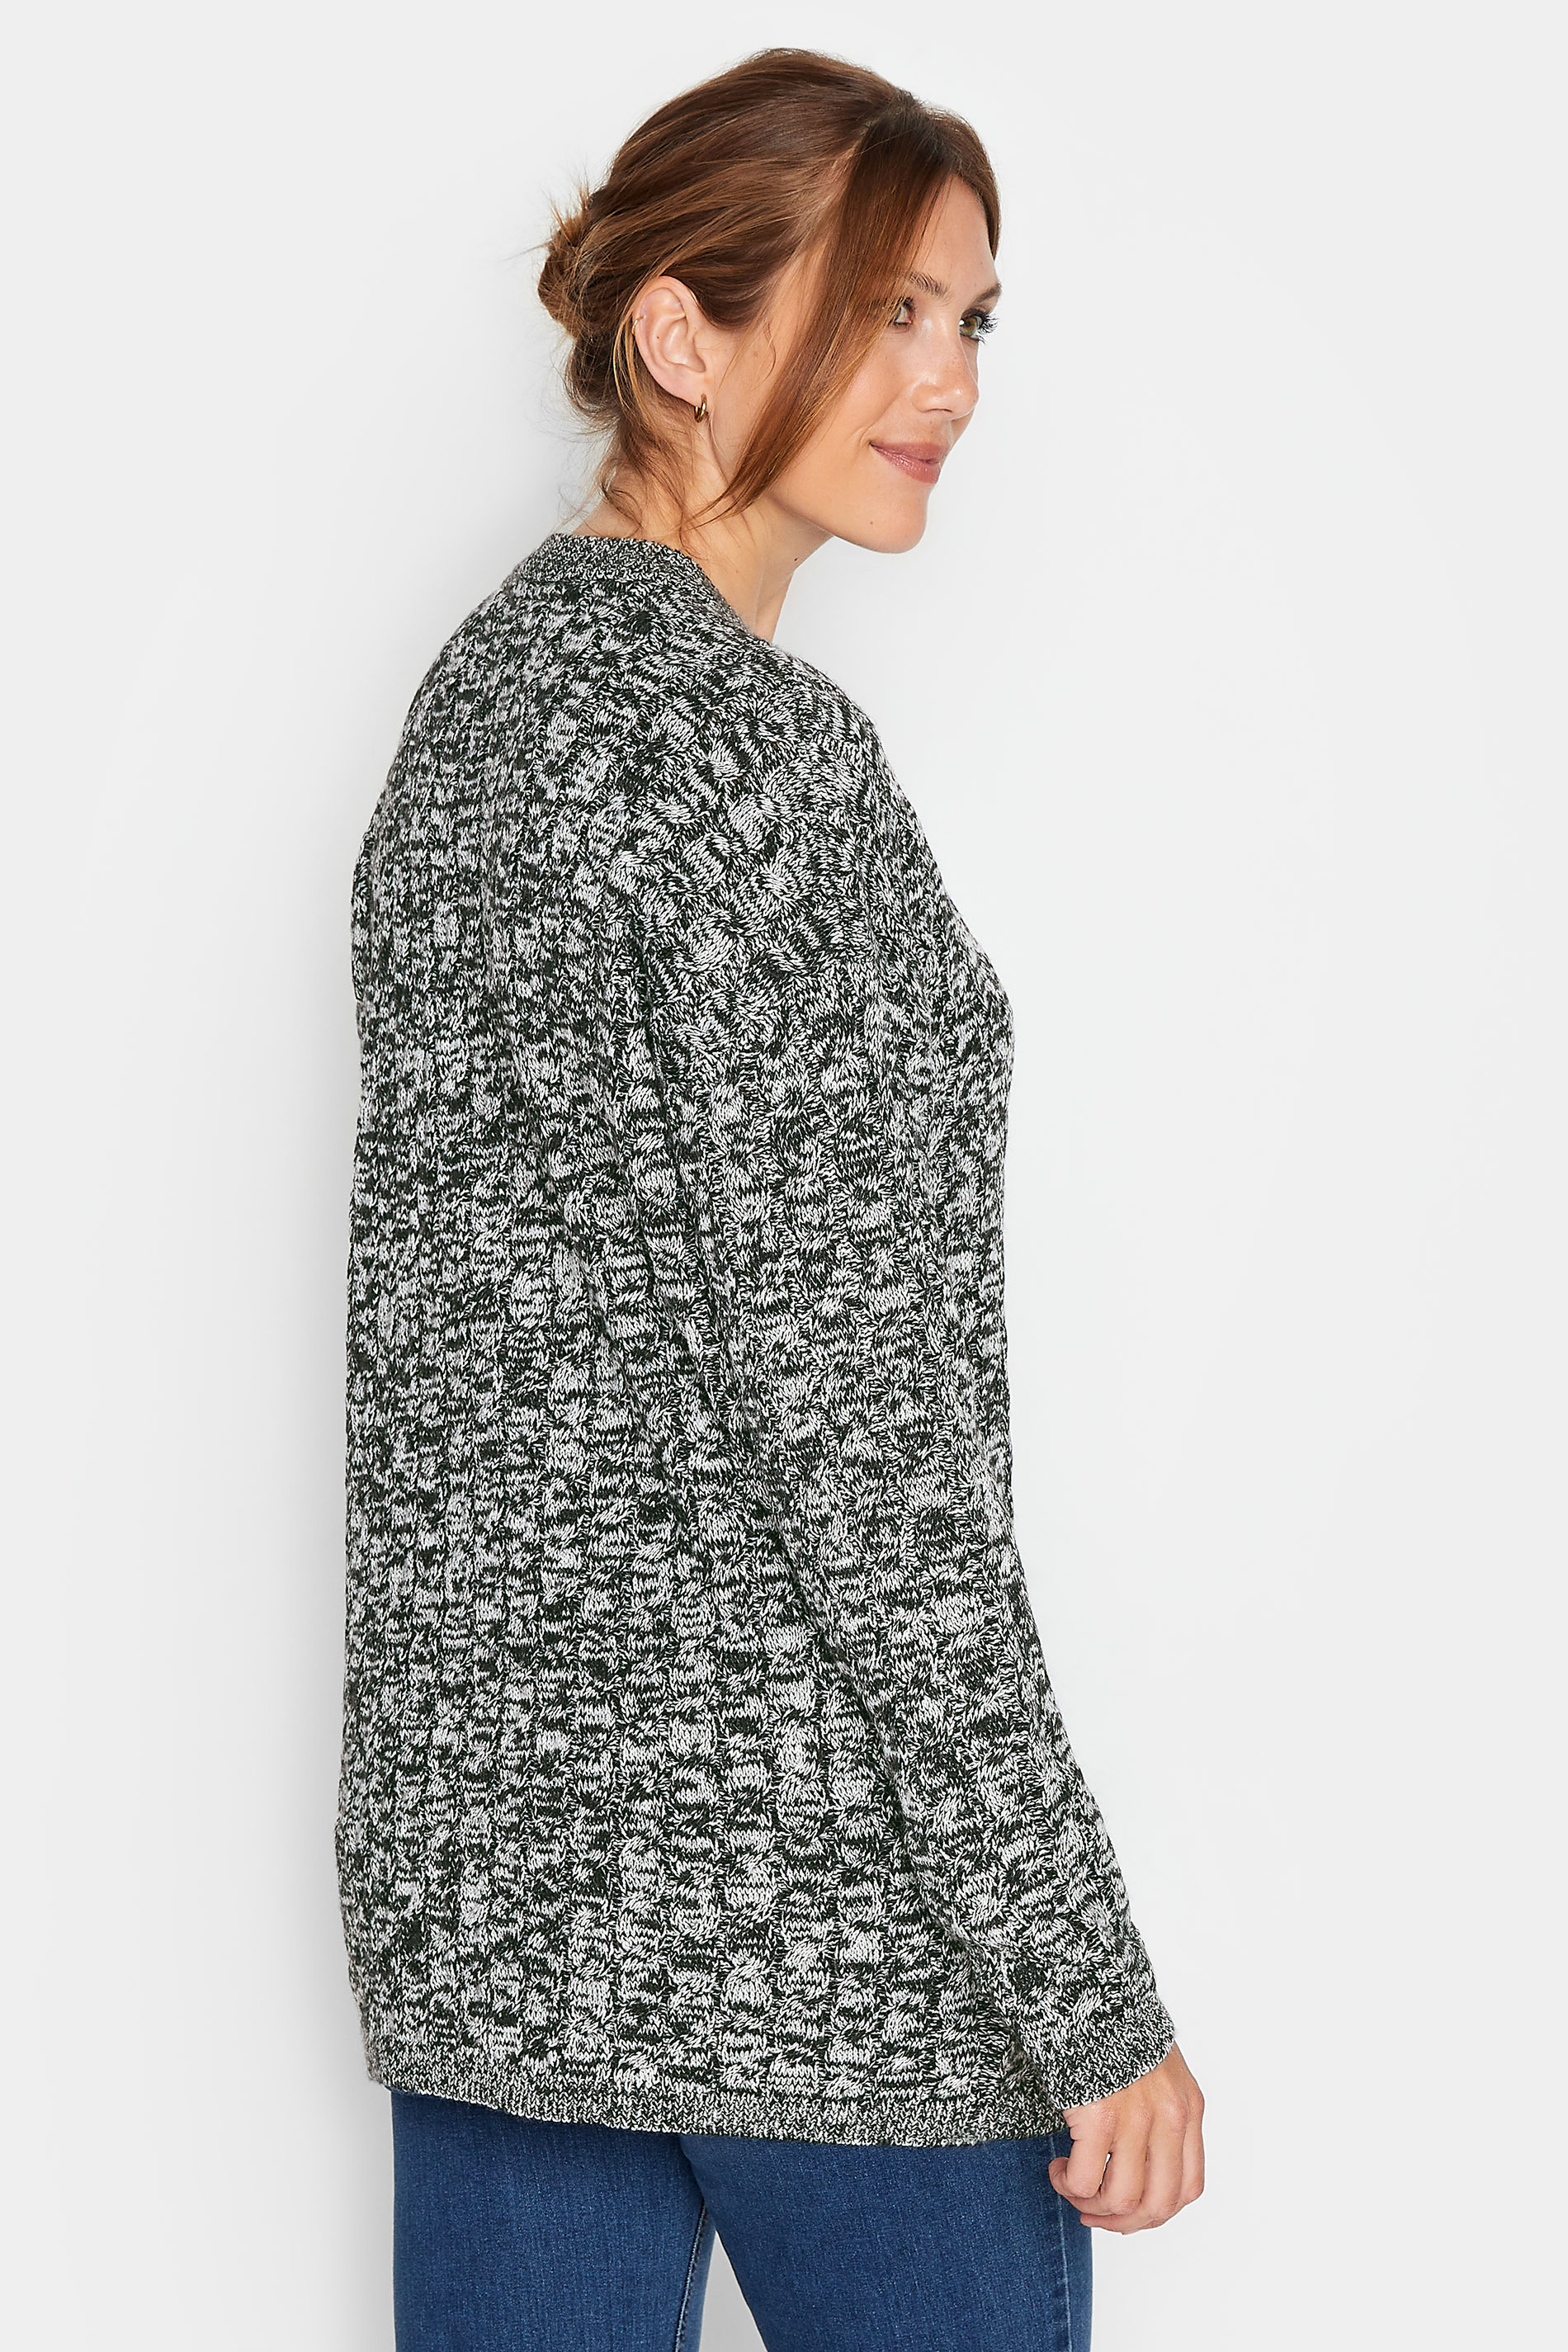 LTS Tall Black & White Cable Knit Jumper | Long Tall Sally 3